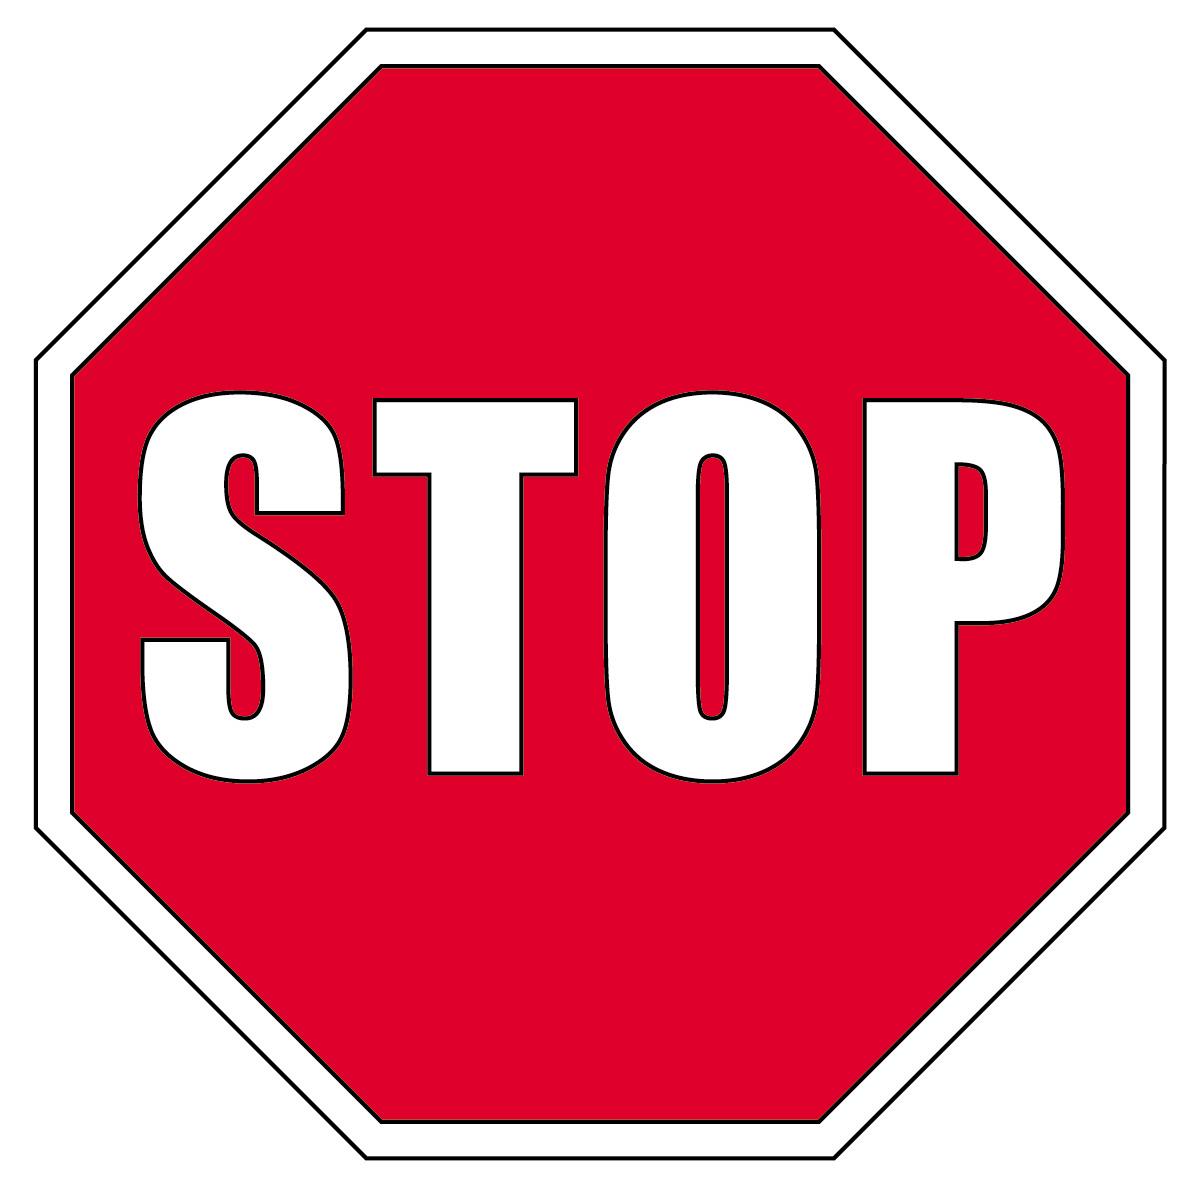 microsoft clipart stop sign - photo #8